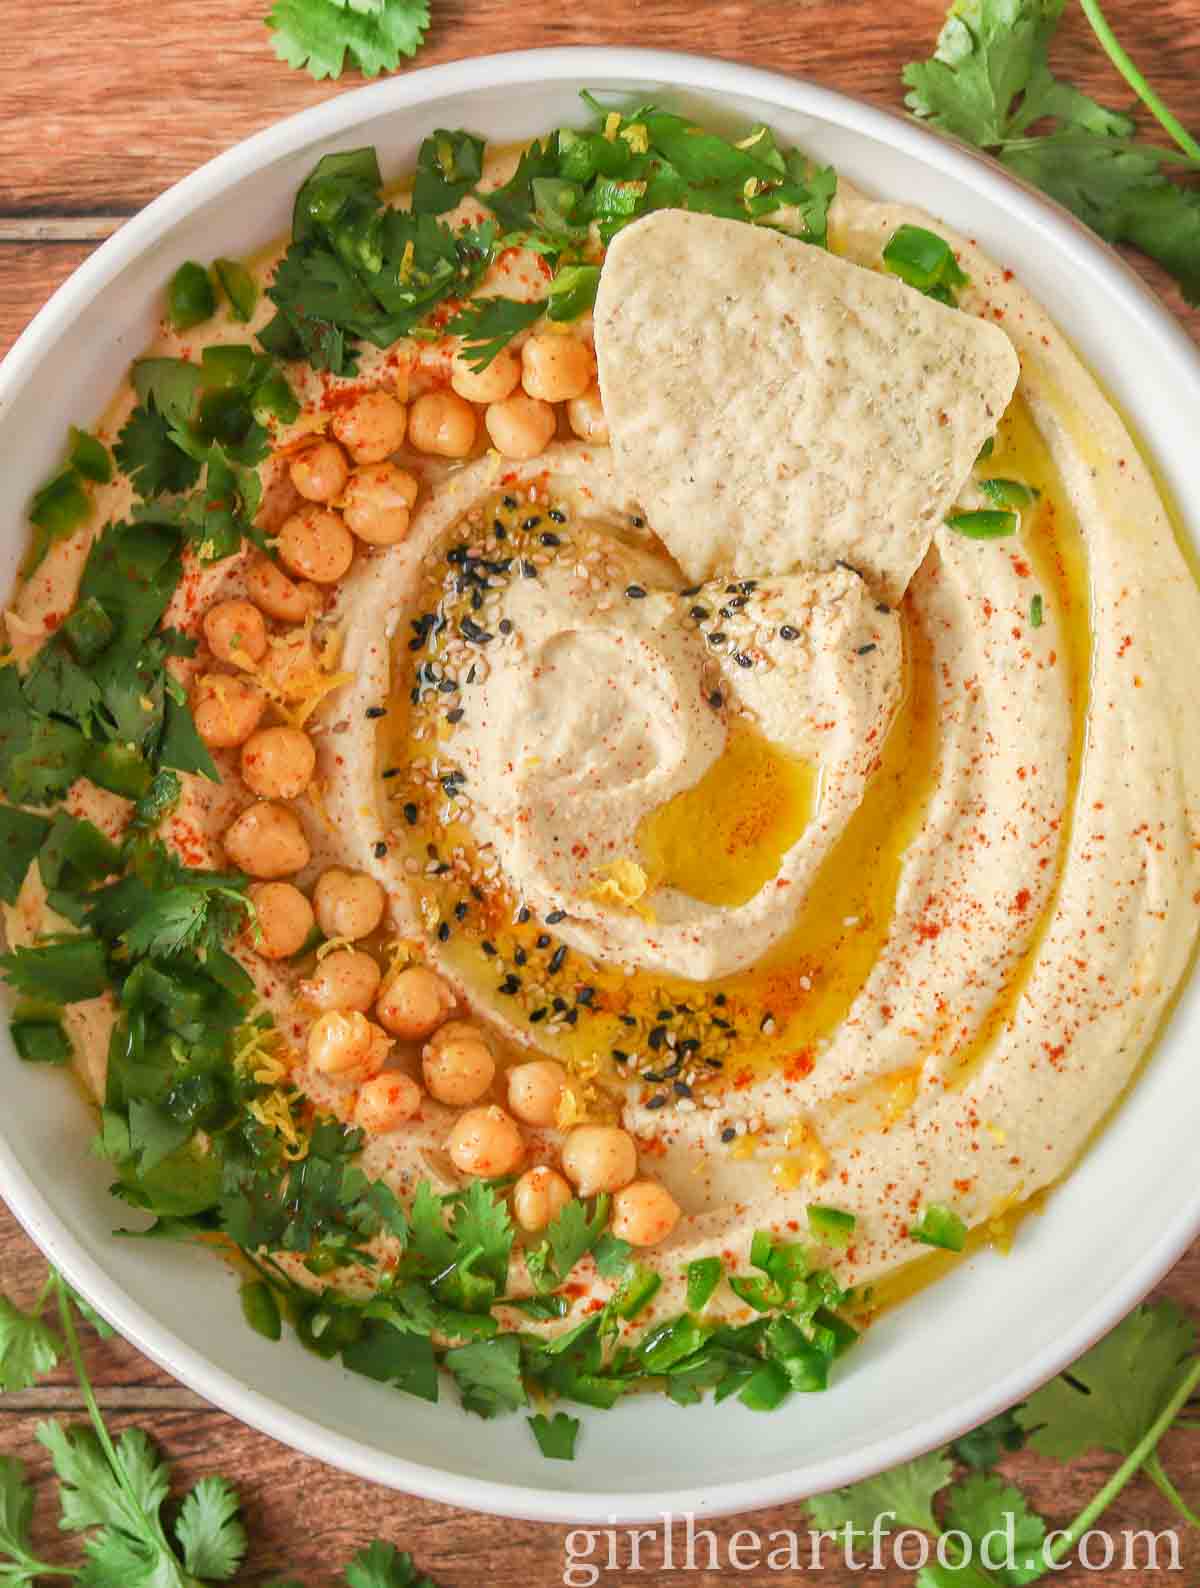 Bowl of hummus garnished with toppings and a tortilla chip dunked into it.